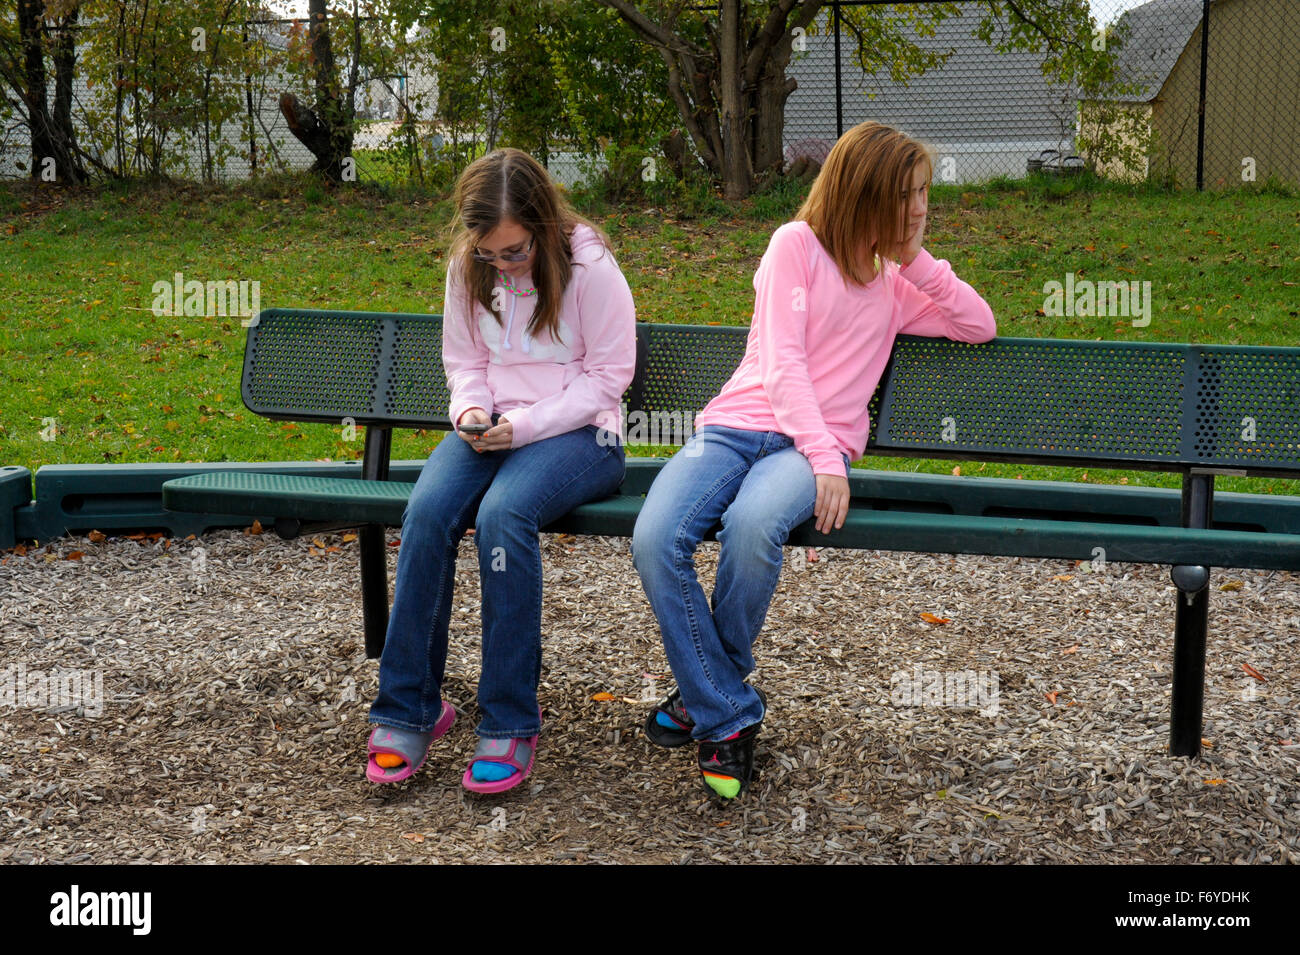 Two preteen girls in park. One girl being ignored while the other girl is on cell phone. Stock Photo